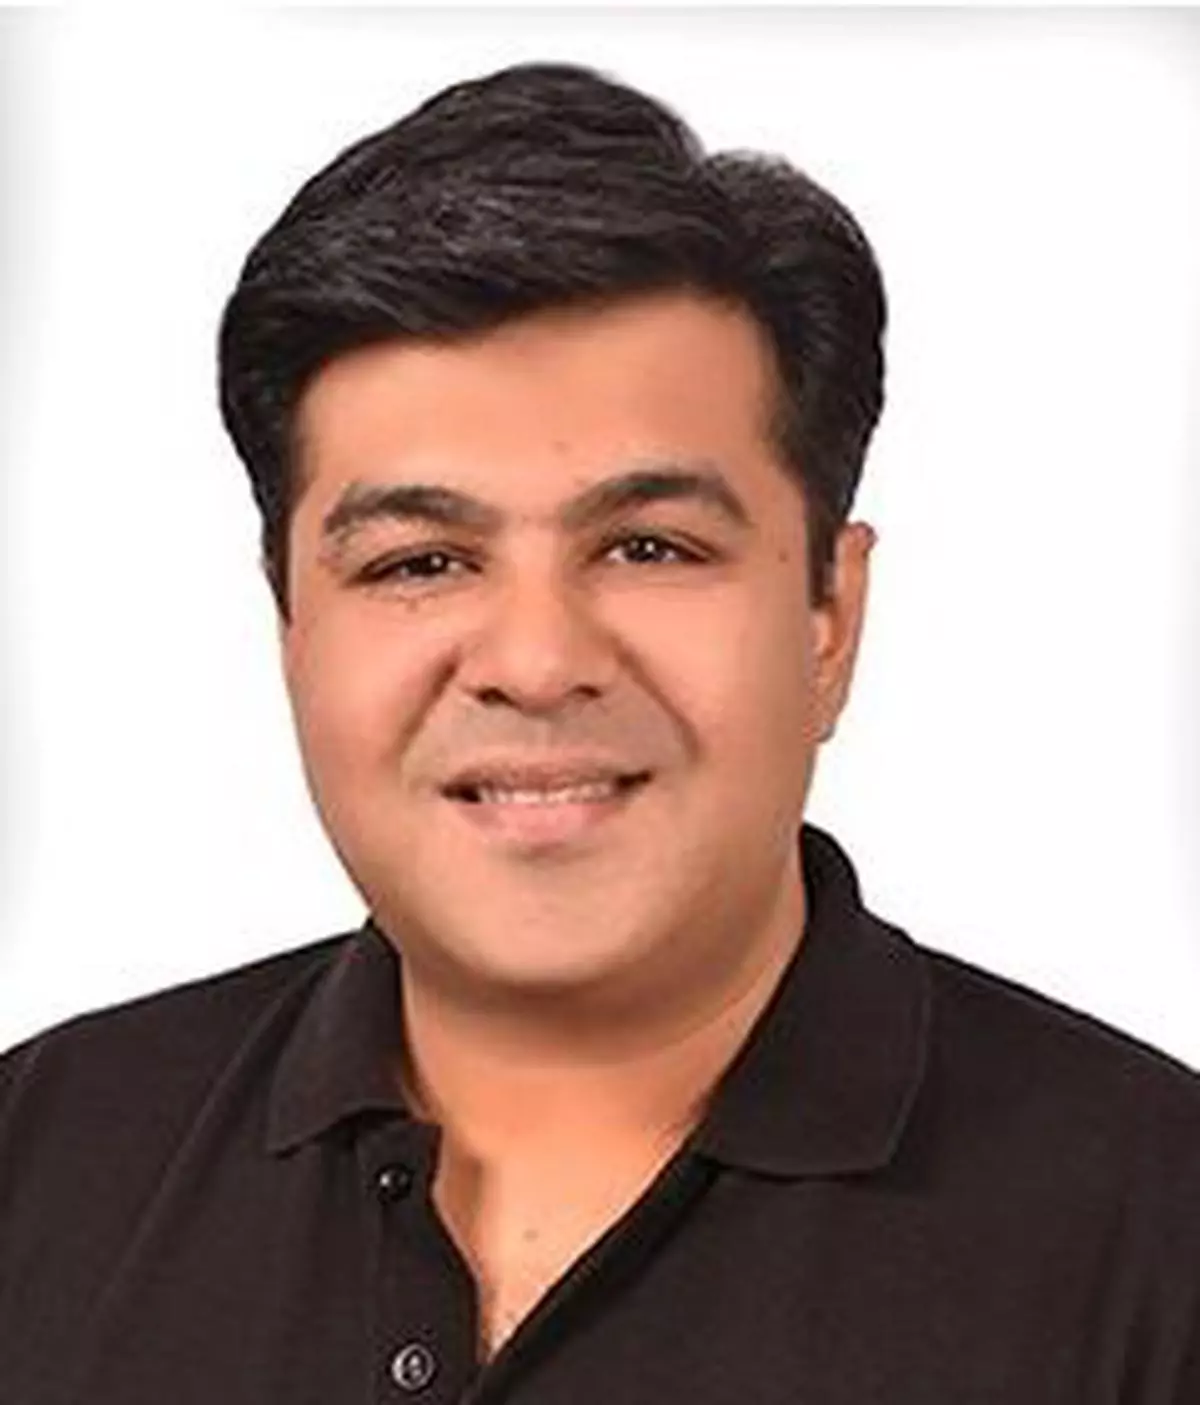  Sameer Aggarwal, Founder and Chief Executive Officer, RevFin